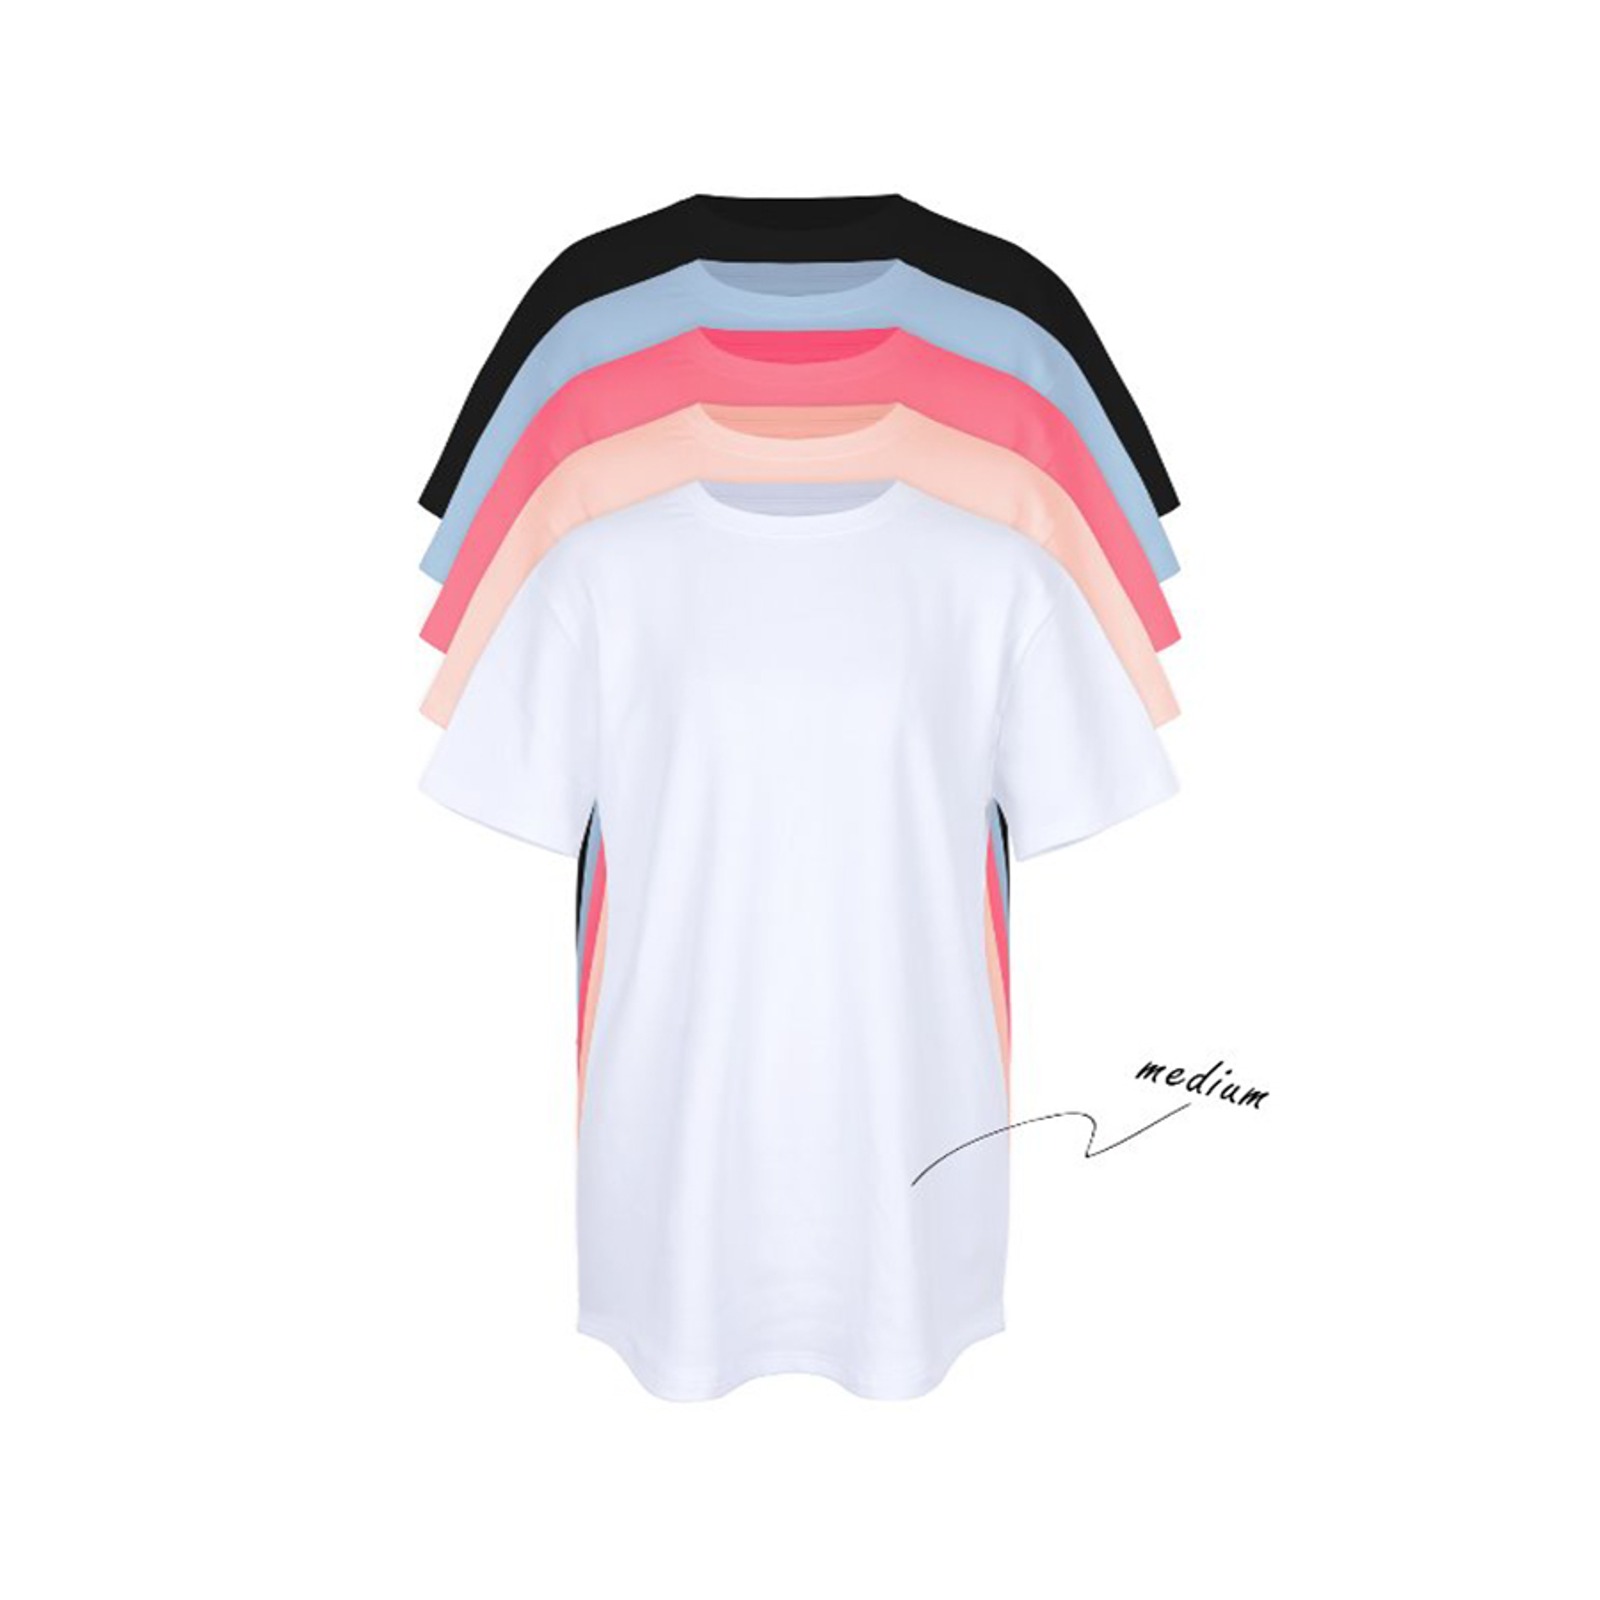 W.Basic span t-shirts (M사이즈) 5color